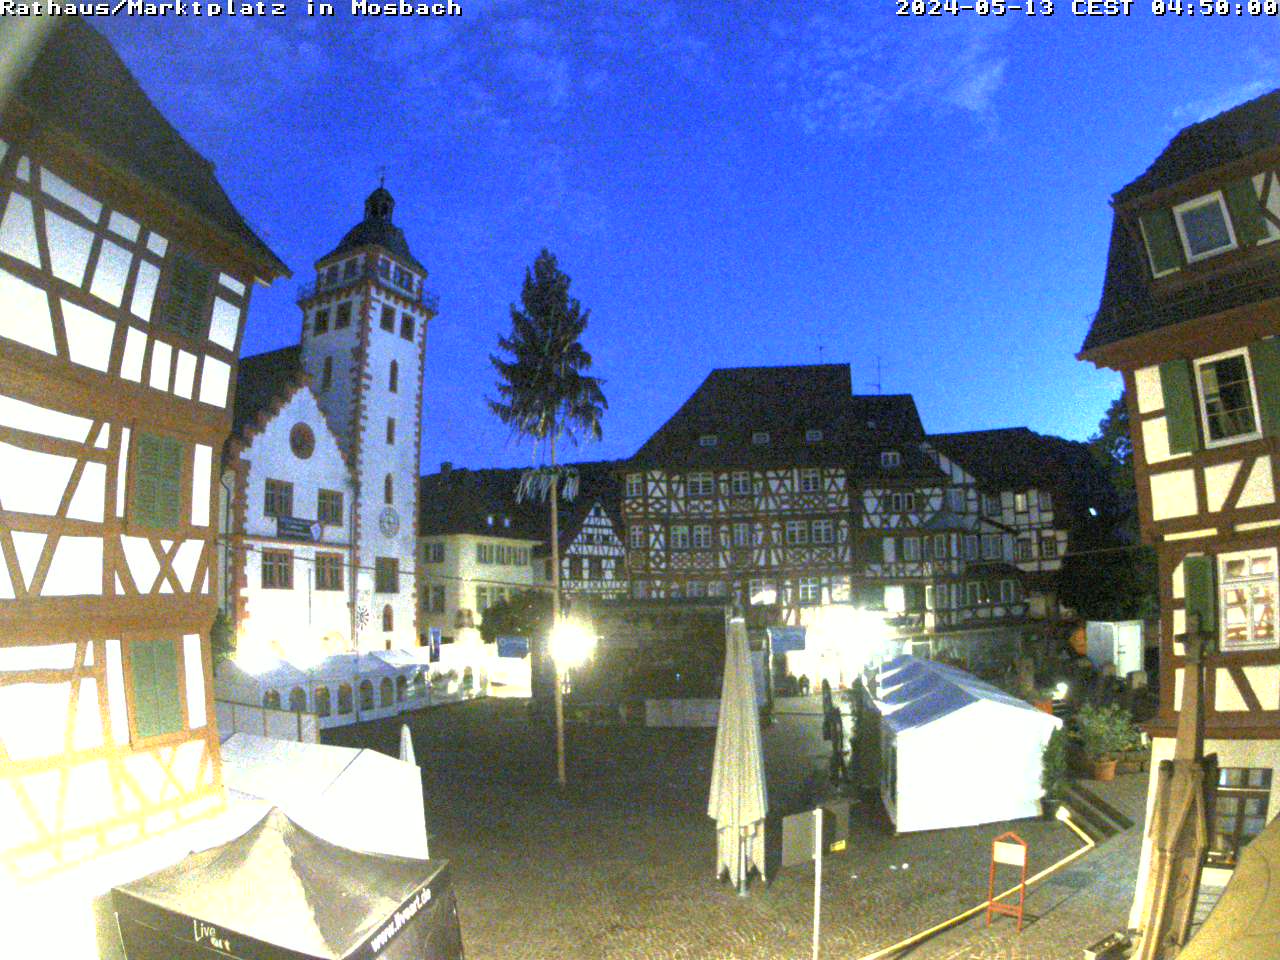 Mosbach Fre. 04:54